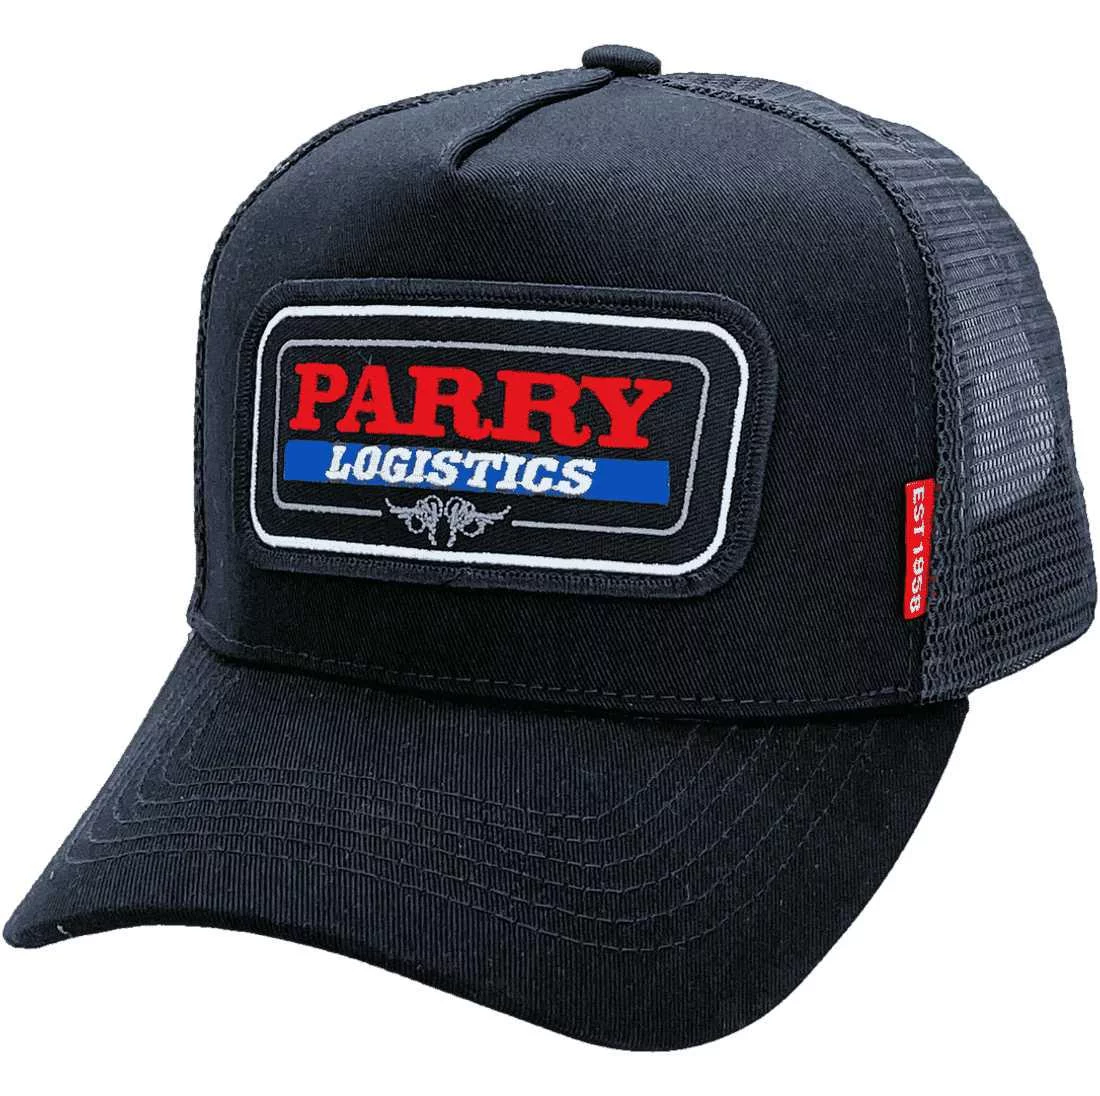 Parry Logistics Cargo and Freight Tamworth NSW HP Original Basic Aussie Trucker Hat with Australian Head Fit Crown Size